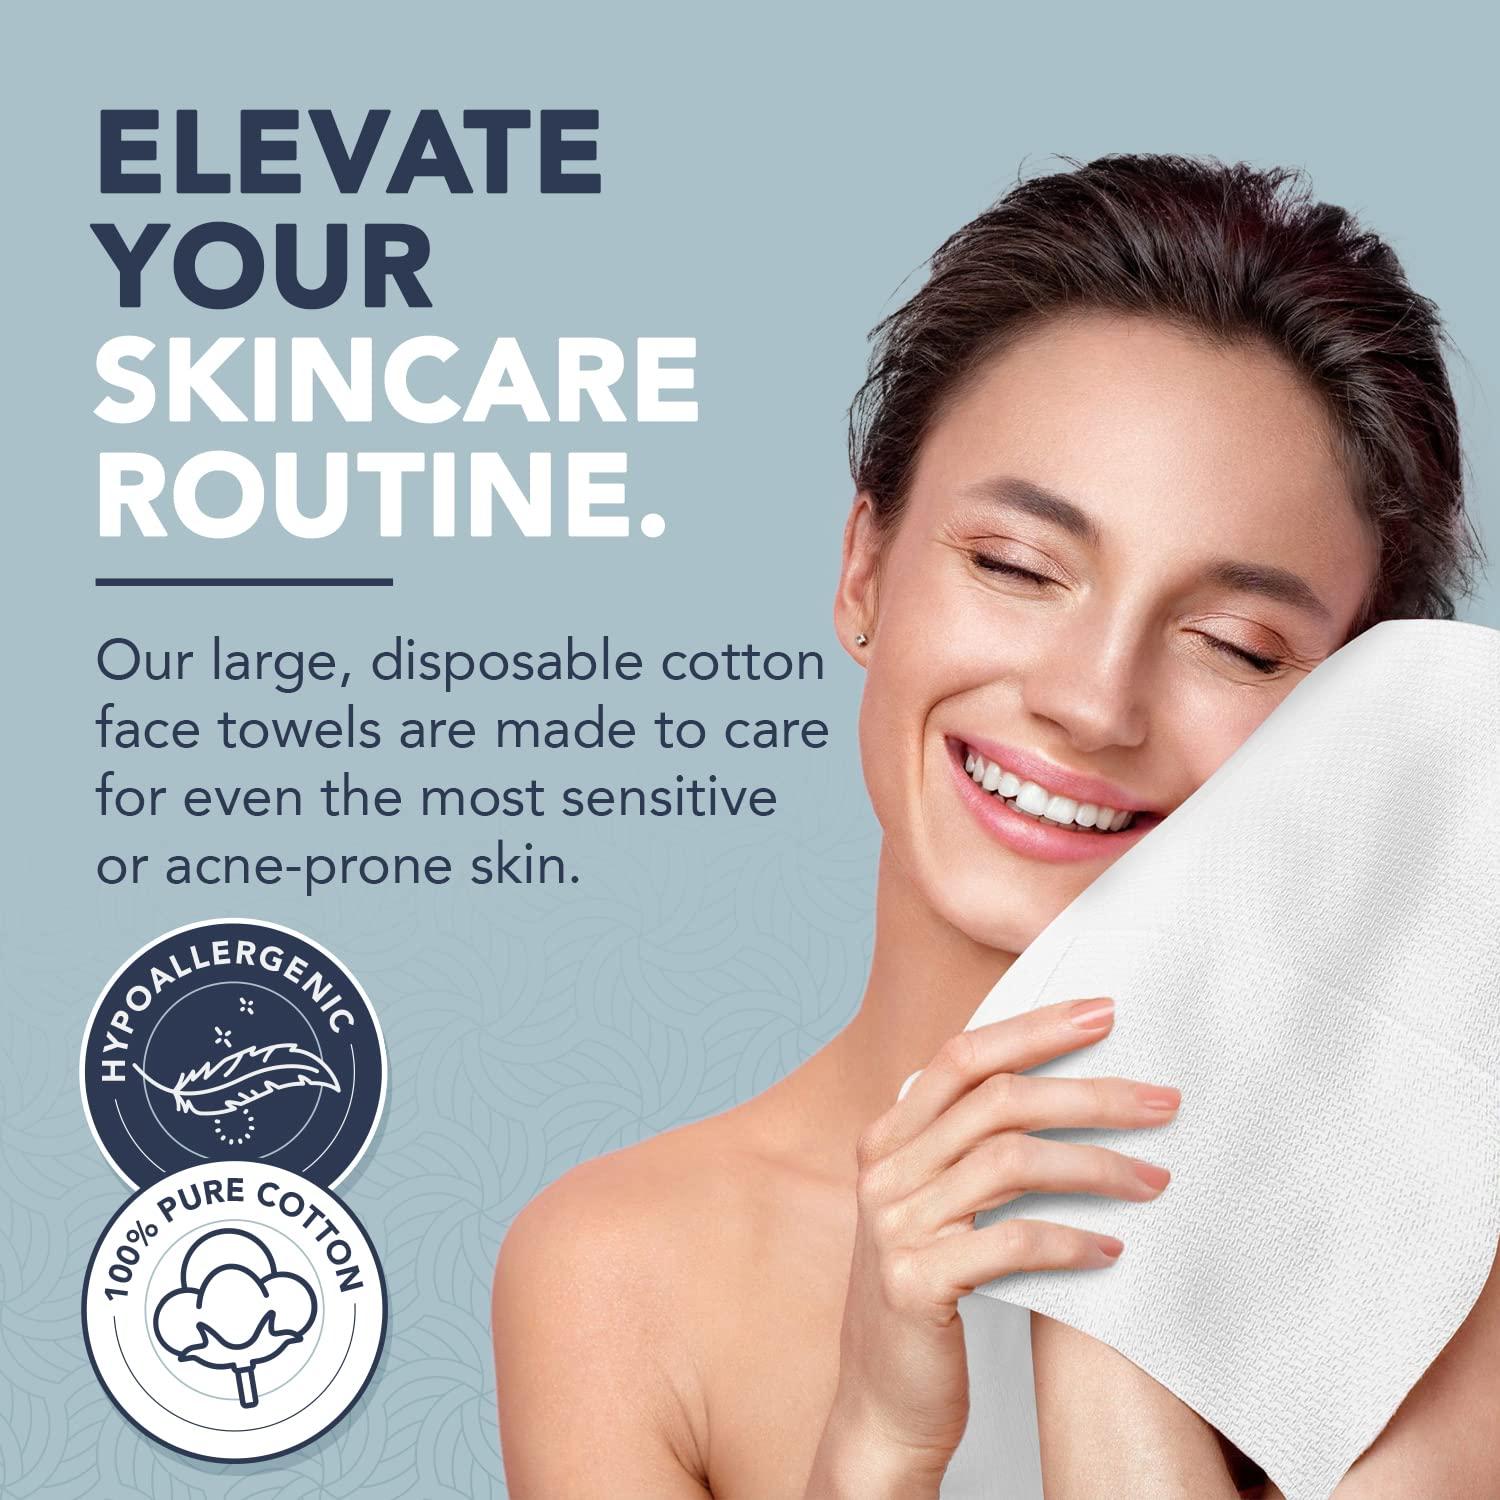 No, you don't need to use disposable face towels to prevent acne